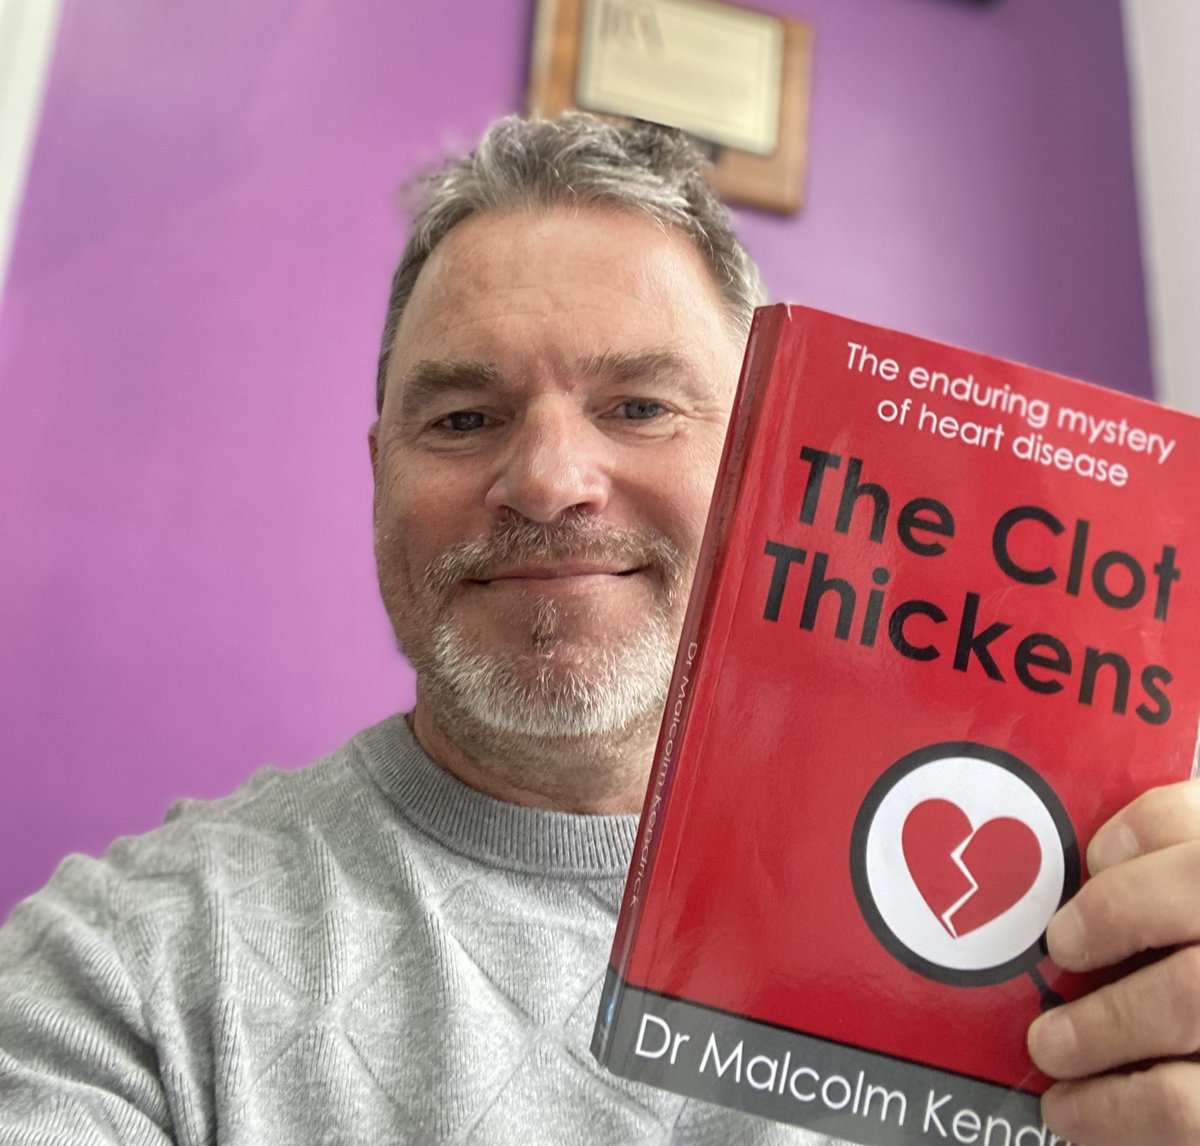 If you want to know what really causes heart disease and how to avoid it through lifestyle and diet (not drugs and statins) read this new book, by @malcolmken it’s awesome